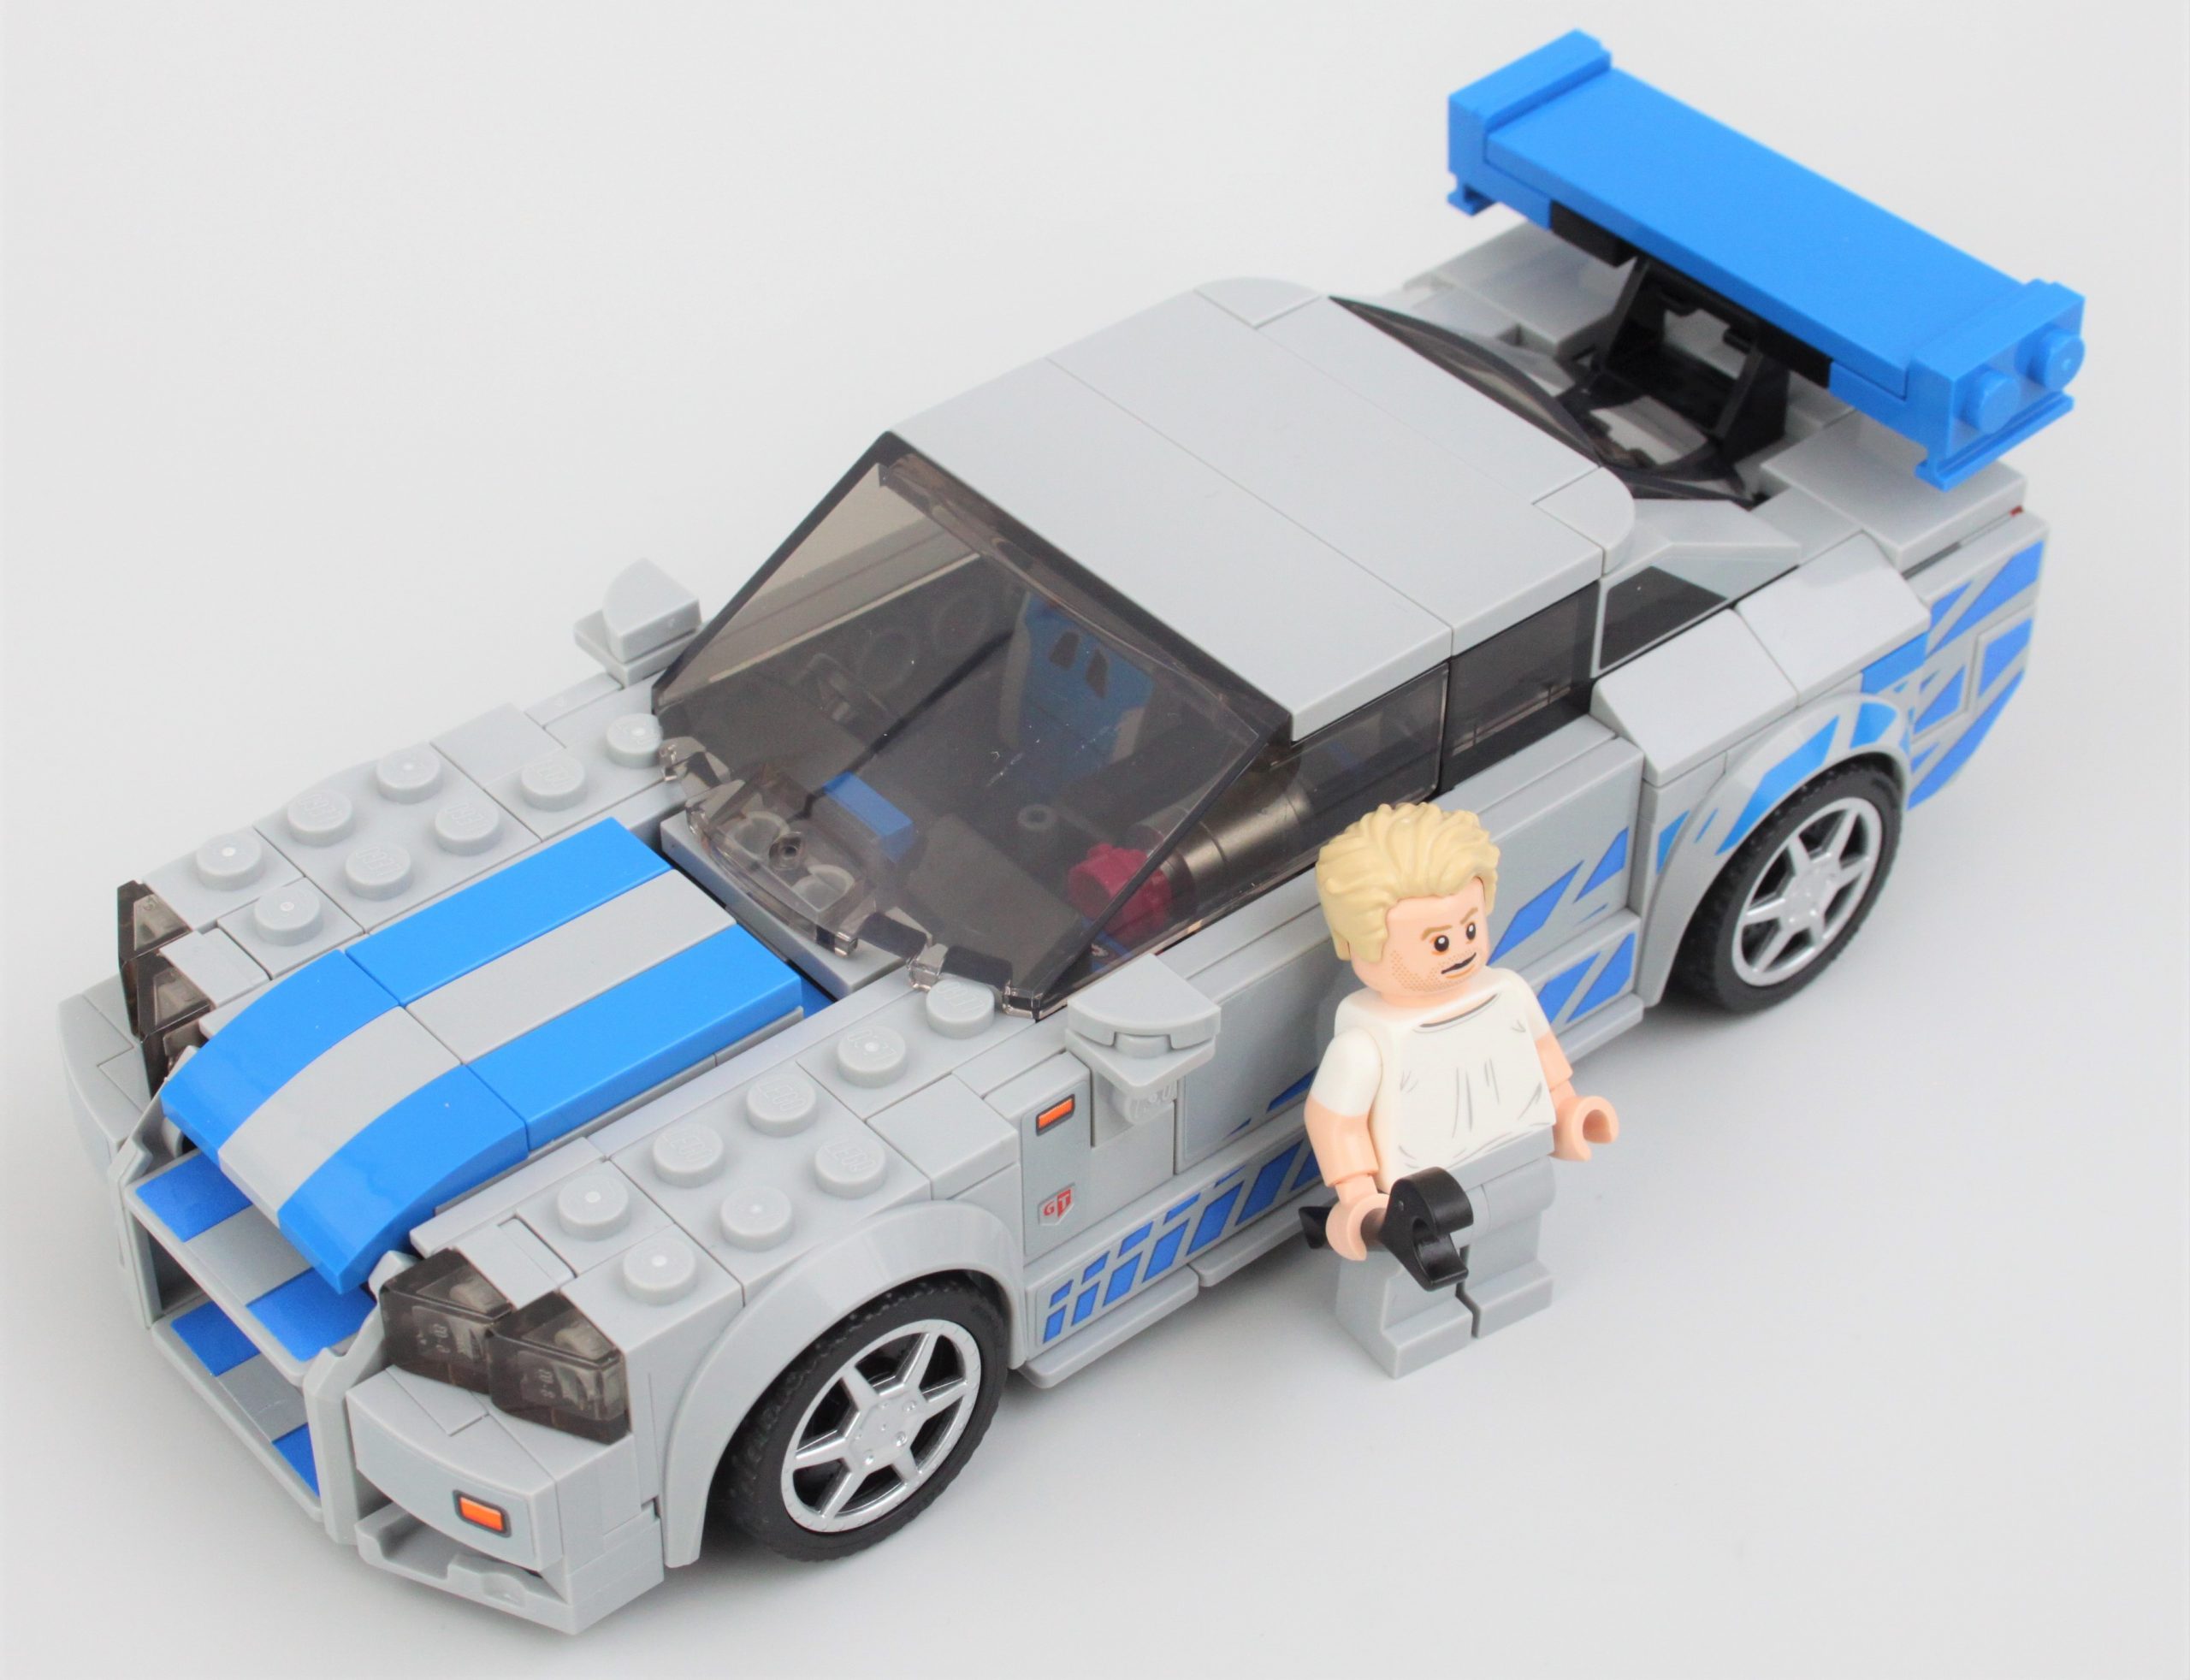 LEGO Speed ​​Champions 2 Fast 2 Furious Nissan GT-R R34